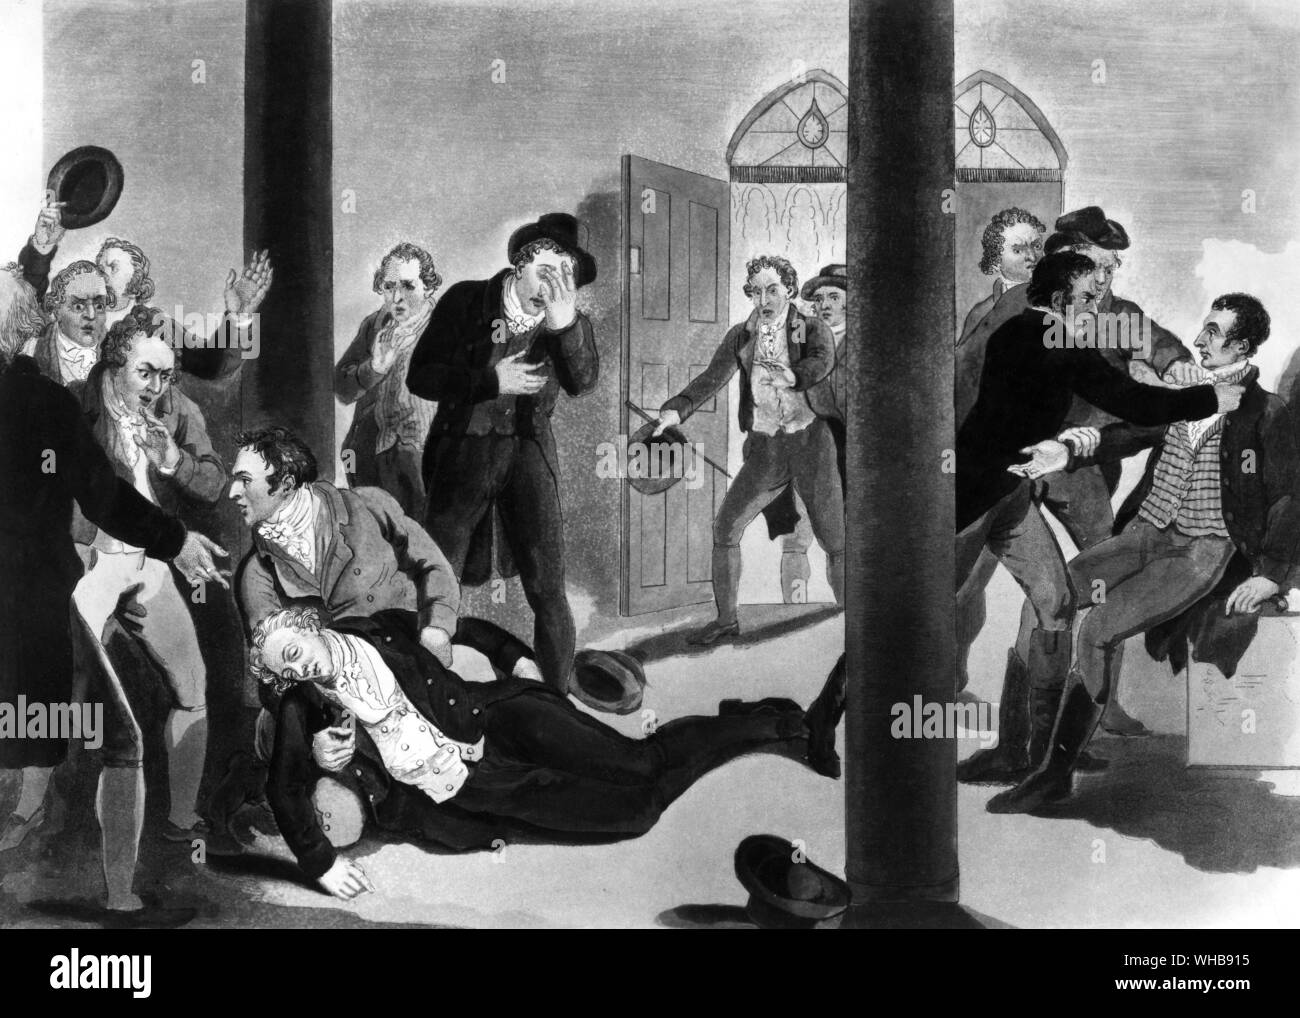 The assassination of the Right Hon. Spencer Perceval - in the lobby leading to the House of Commons 11 May 1812.. On 11 May 1812, while on his way to take part in a debate on the Orders in Council passed by Portland's ministry, Perceval was shot in the lobby of the House of Commons by John Bellingham. Bellingham, who had been trying unsuccessfully to obtain government compensation for debts incurred while he was in Russia, gave himself up immediately. He was tried at the Old Bailey and condemned to death: he was executed on 18 May 1812. Perceval was buried in the family vault in St. Luke's, Stock Photo